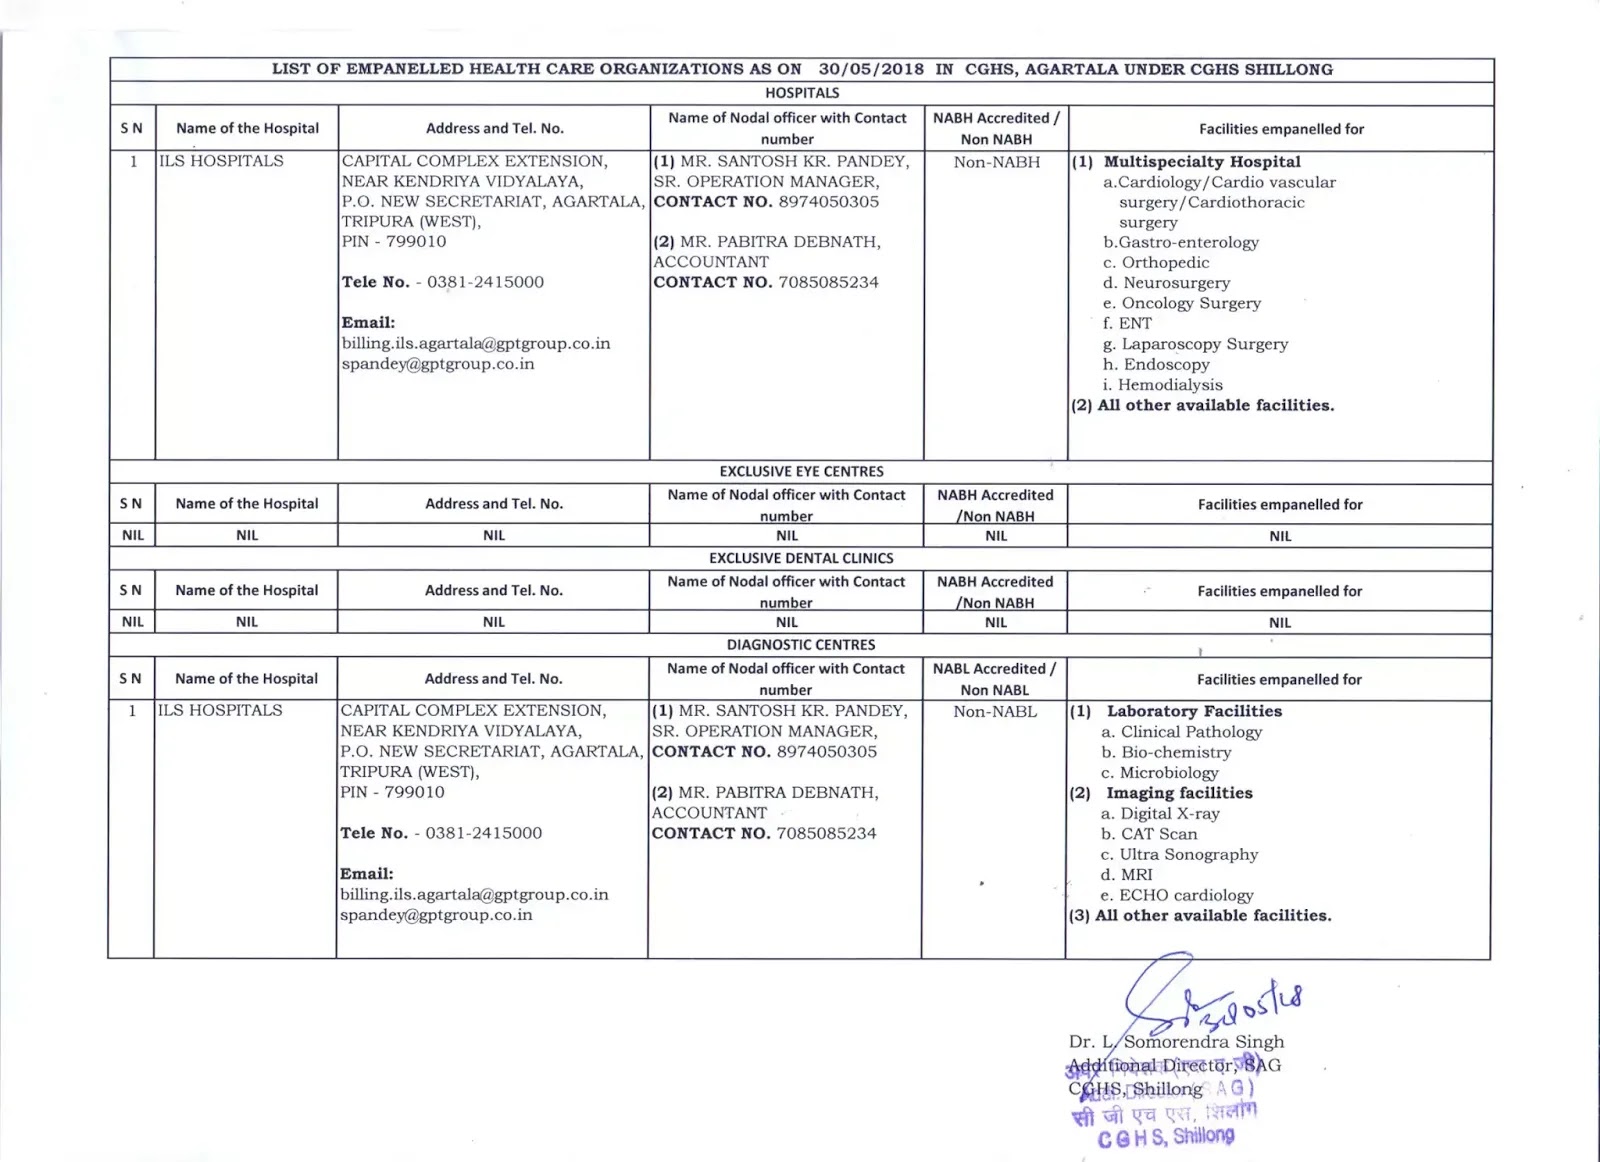 CGHS Agartala: List of empanelled Hospitals and Diagnostic Centres as on 30.05.2018